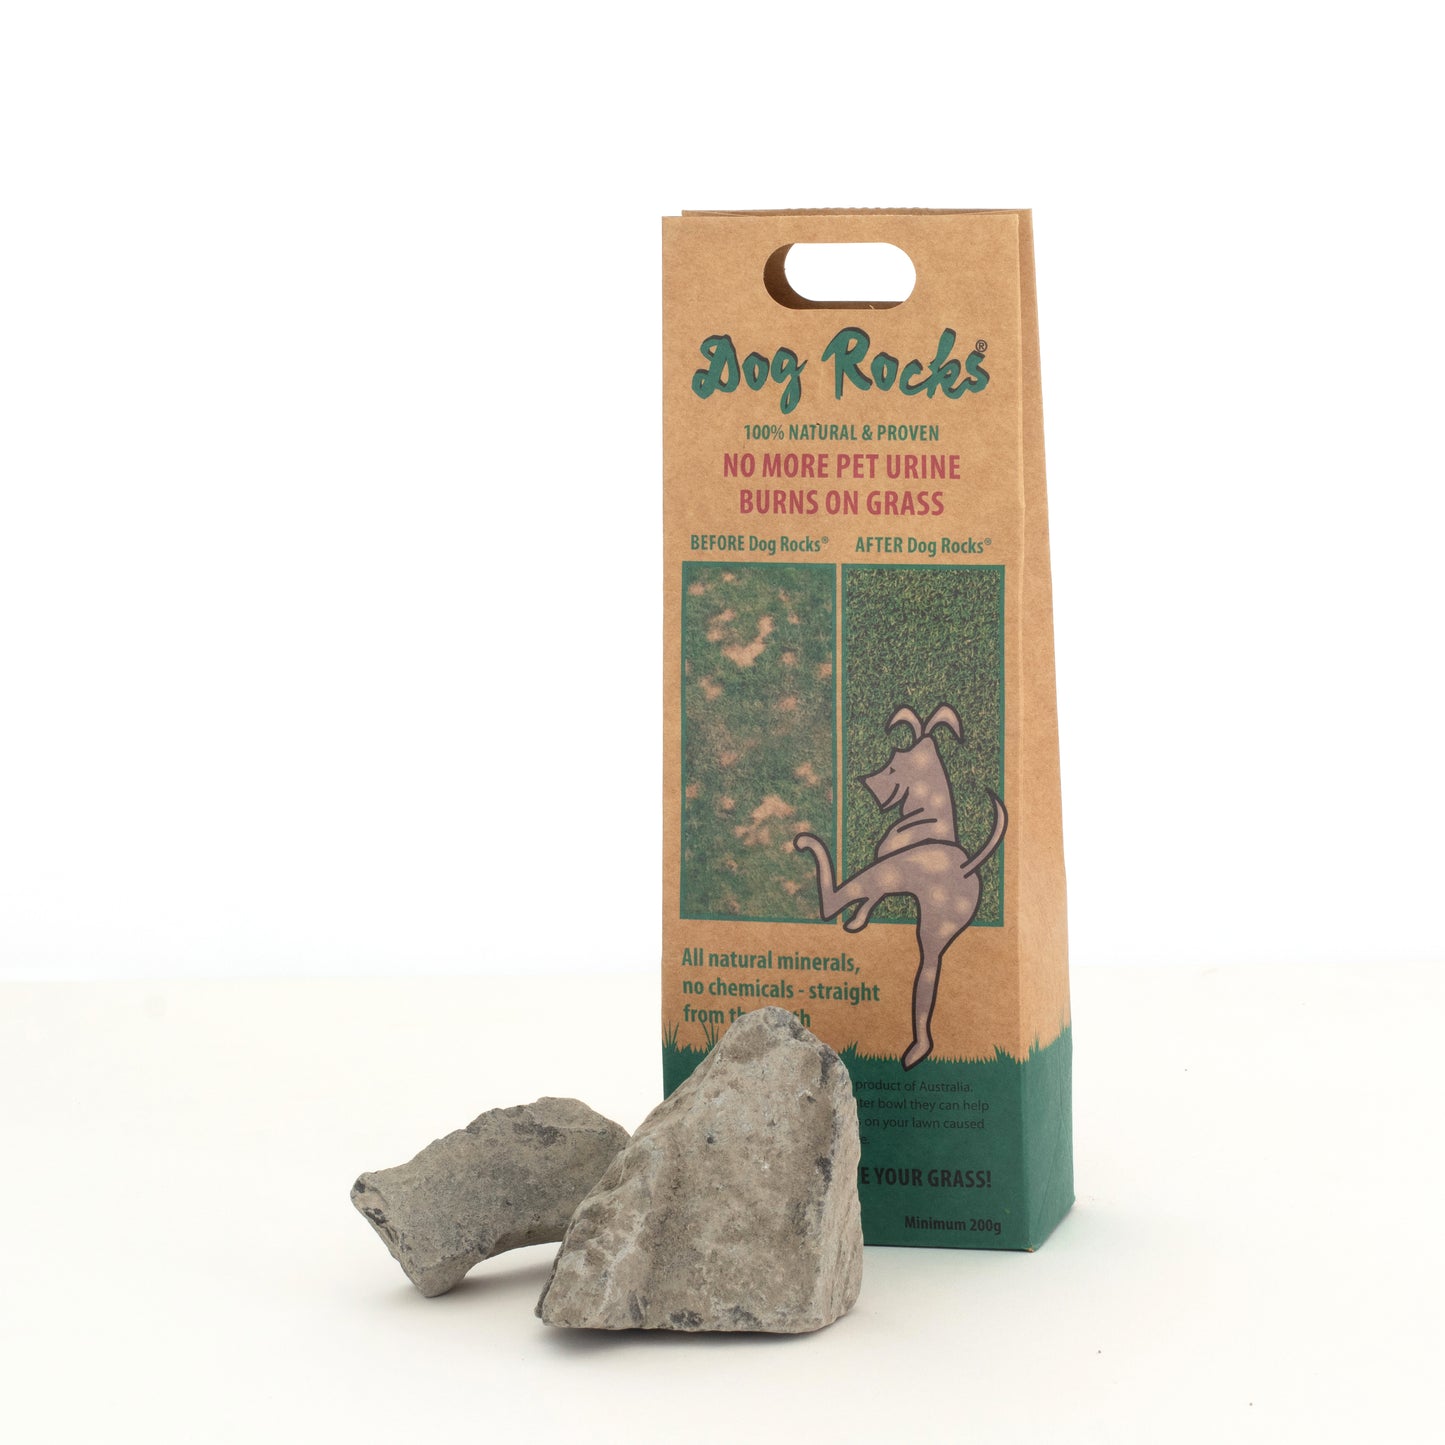 Dog Rocks 200g - Water Purification for Household Pets